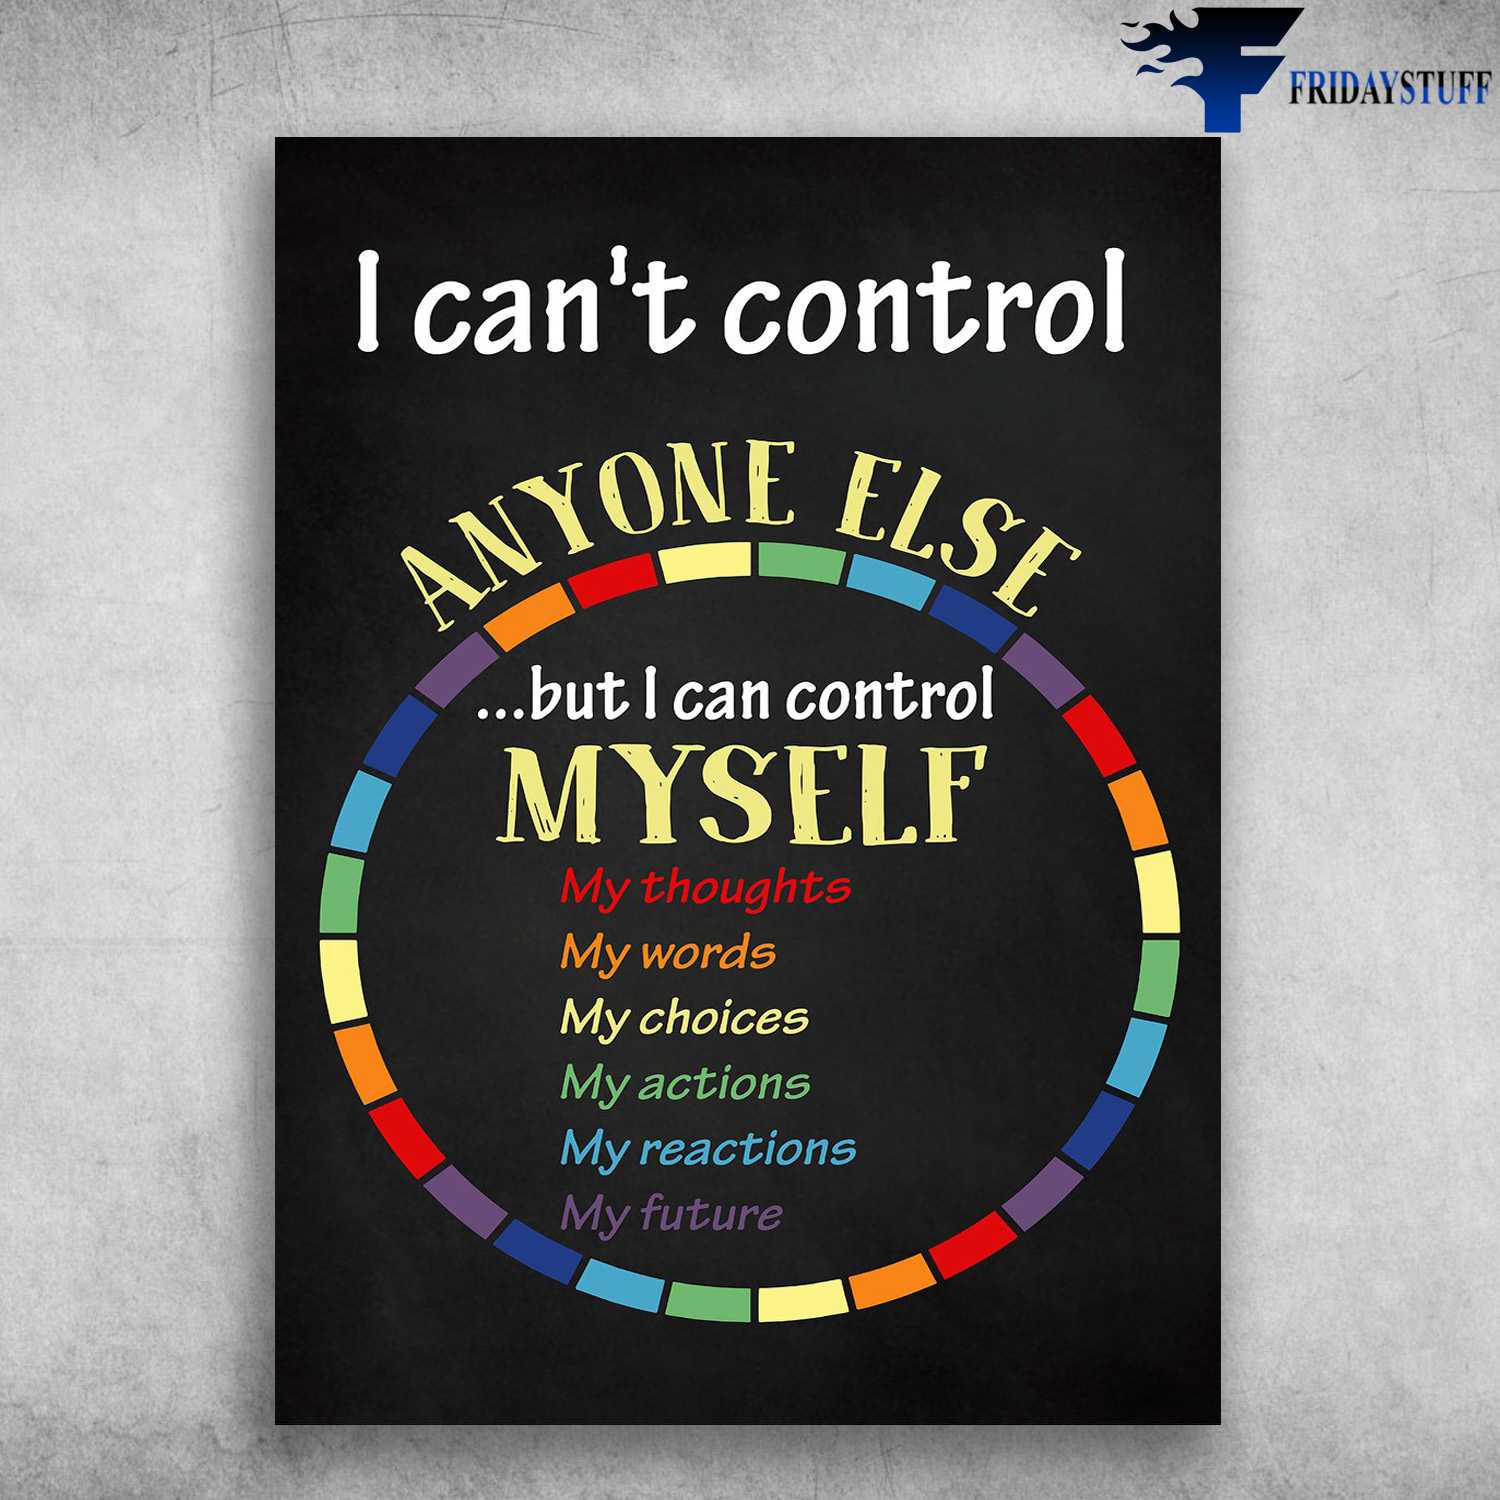 Social Worker - I Can't Control Anyone Else, But I Can Control Myself, My Thoughts, My Words, My Choices, My Actions, My Reactions, My Future